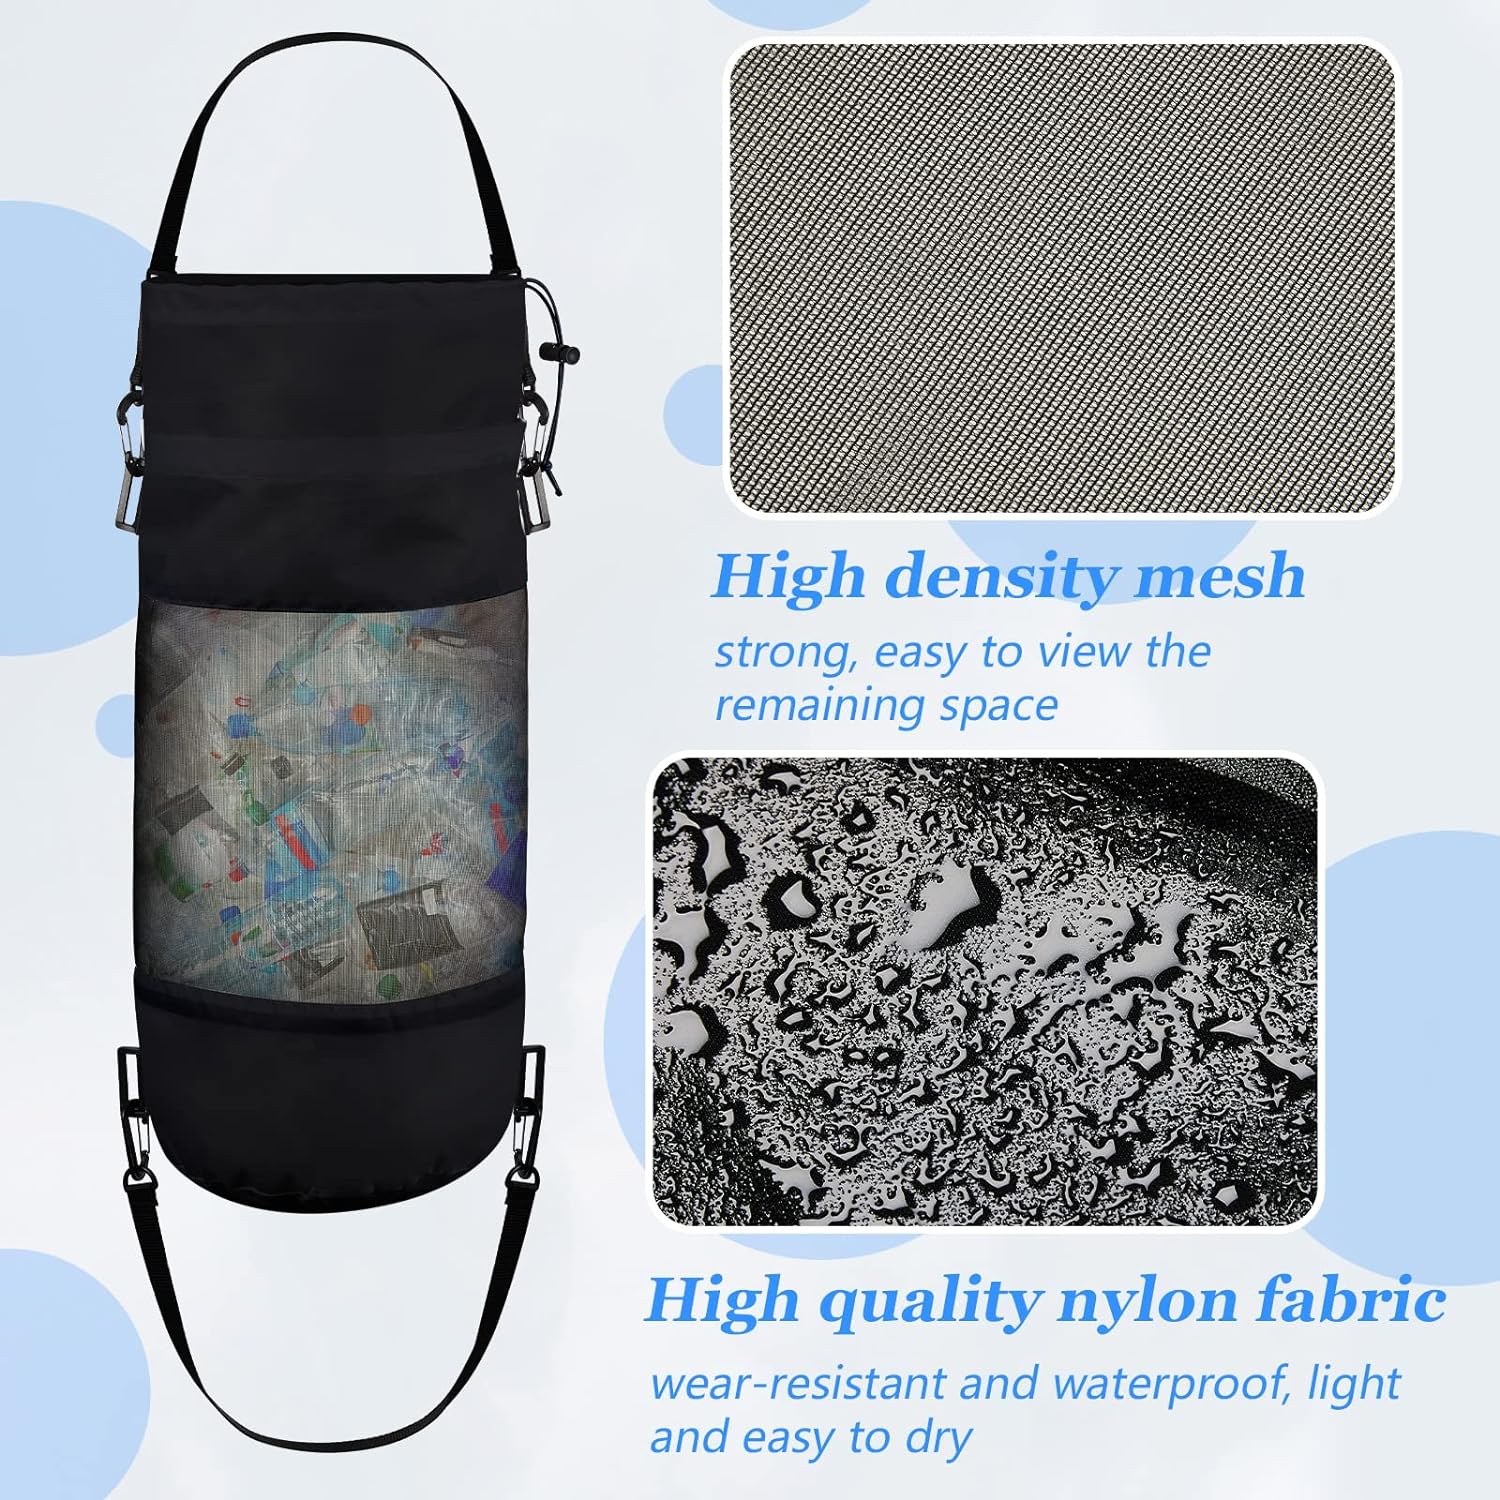 2 Packs Portable Boat Accessories Trash Bags Mesh Trash Bags Boats Trash Can Boat Garbage Container for Boat Kayak Camper Fishing Cabin Storage Men Women Adults - Portable Boat Trash Bags Review